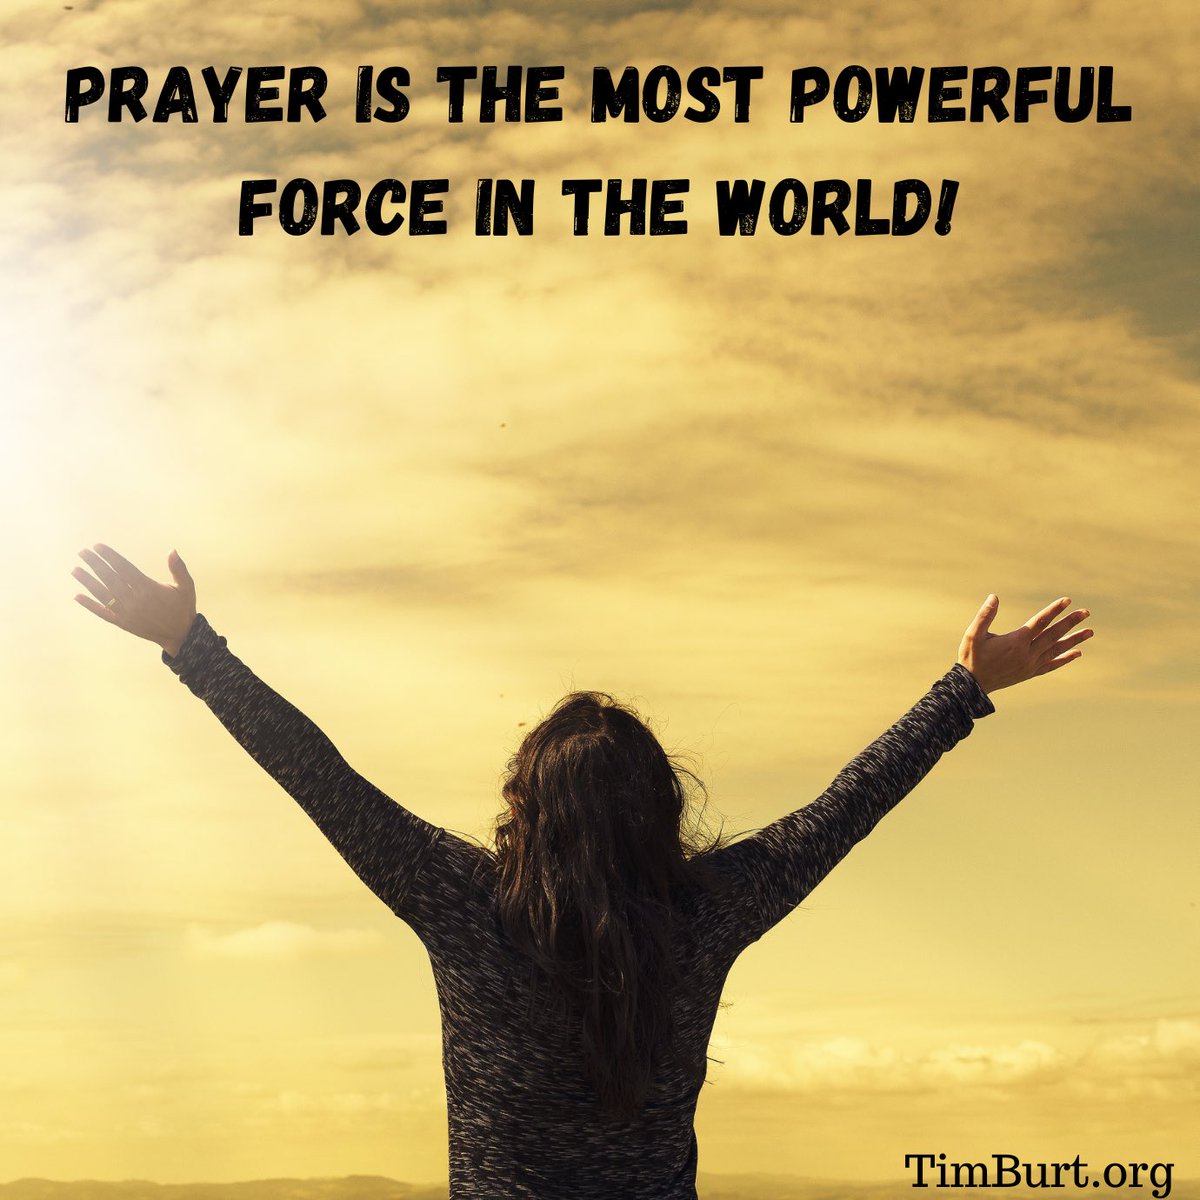 “…The prayer of a righteous person is powerful and effective” James 5:16